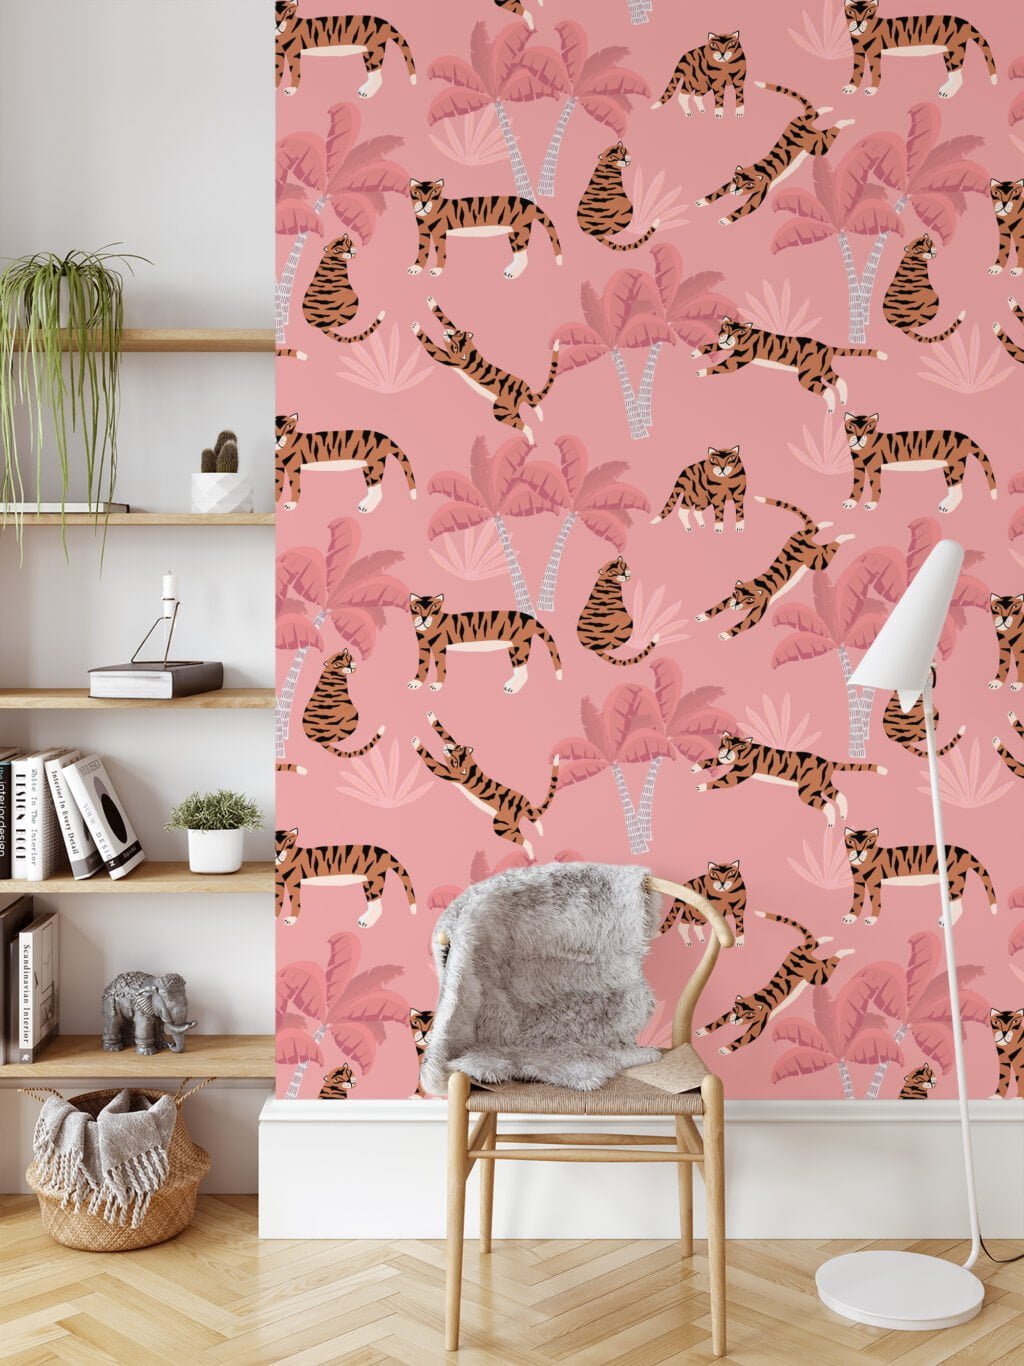 Flat Art Pink Tropical Trees With Tigers Illustration Wallpaper, Whimsical Kids Tropical Peel & Stick Wall Mural